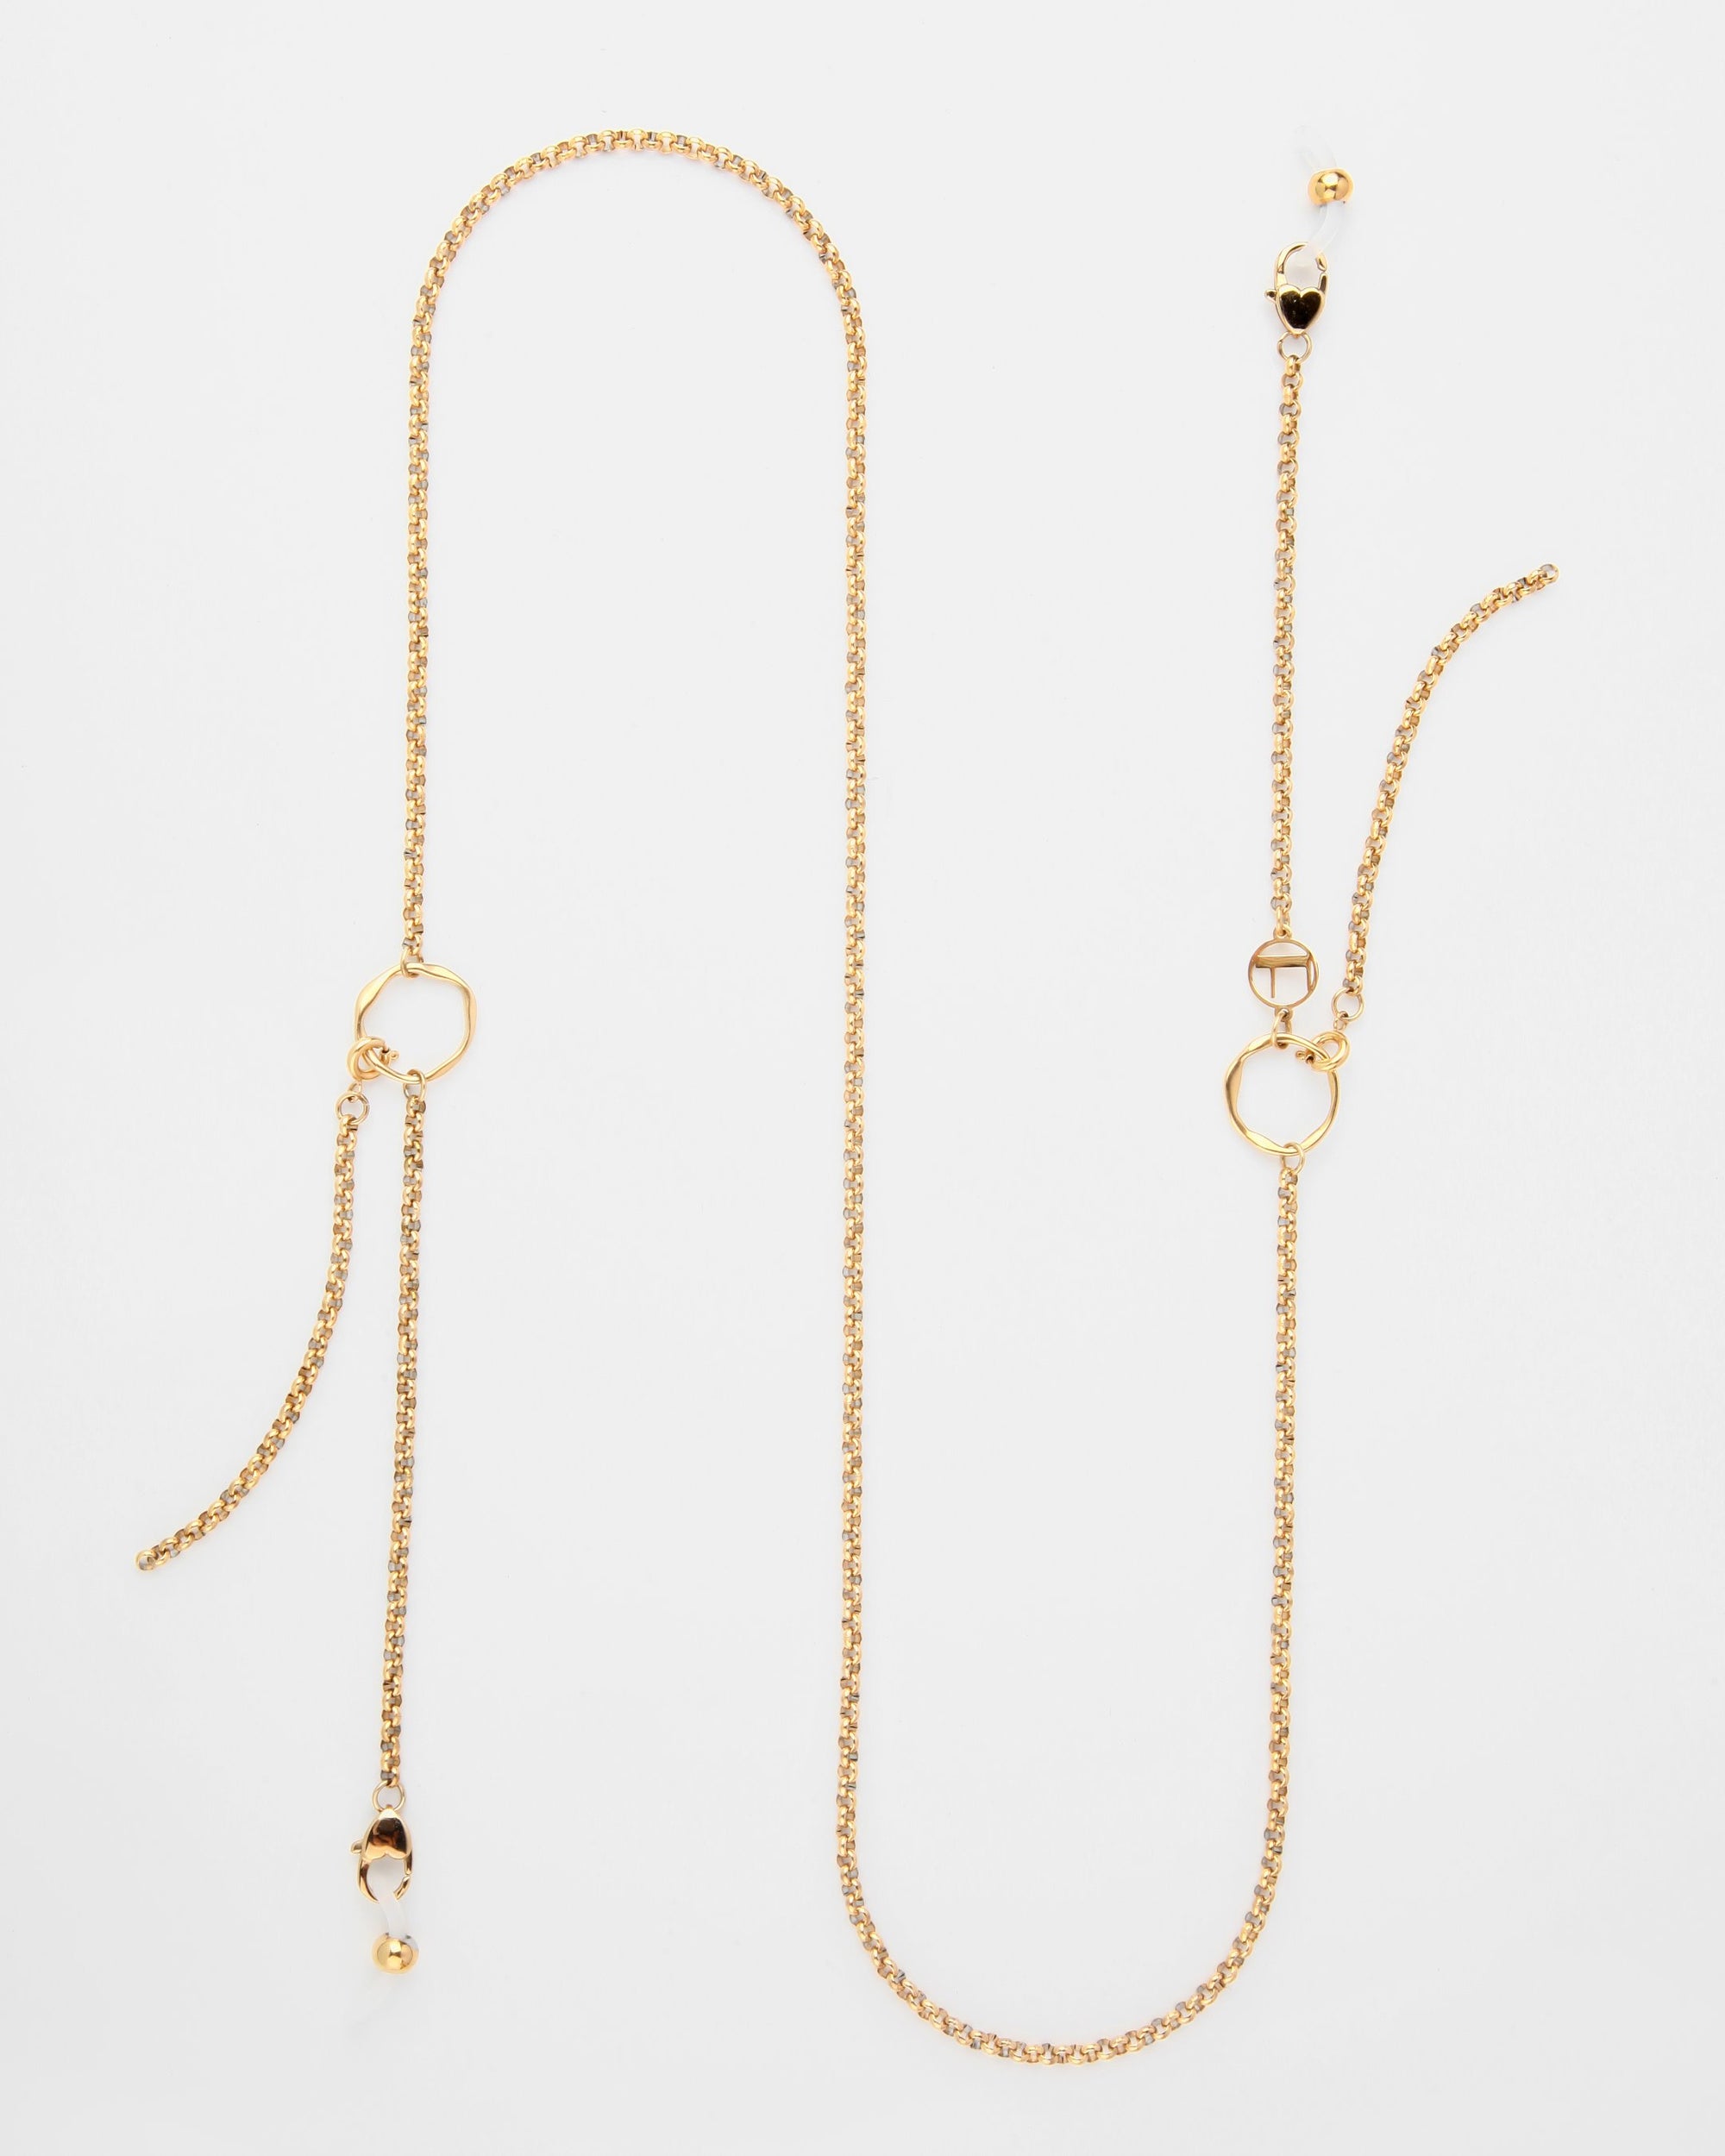 A long 18K gold-plated chain necklace with two geometric-shaped pendants and beaded accents. The adjustable loops and clasp provide a perfect fit. The minimalist, sophisticated design is laid out against a plain white background, similar to the Florentina Glasses Chain by For Art&#39;s Sake®.